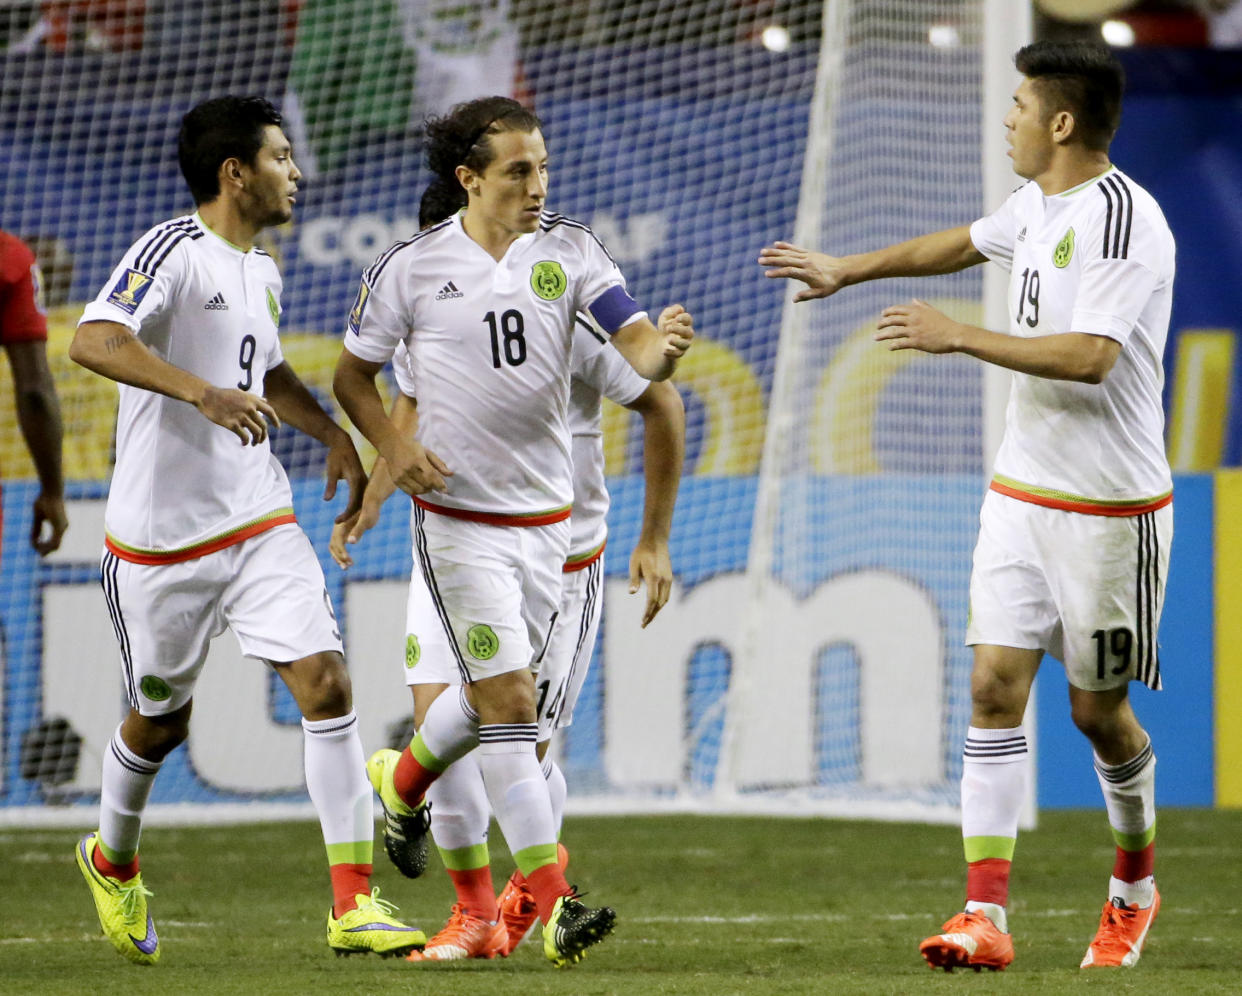 Mexico’s Andres Guardado, center, is congratulated by teammates Jesus Corona, left, and Oribe Peralta after scoring on a penalty kick during the second half of a CONCACAF Gold Cup soccer semifinal against Panama on Wednesday, July 22, 2015, in Atlanta. (AP Photo/David Goldman)